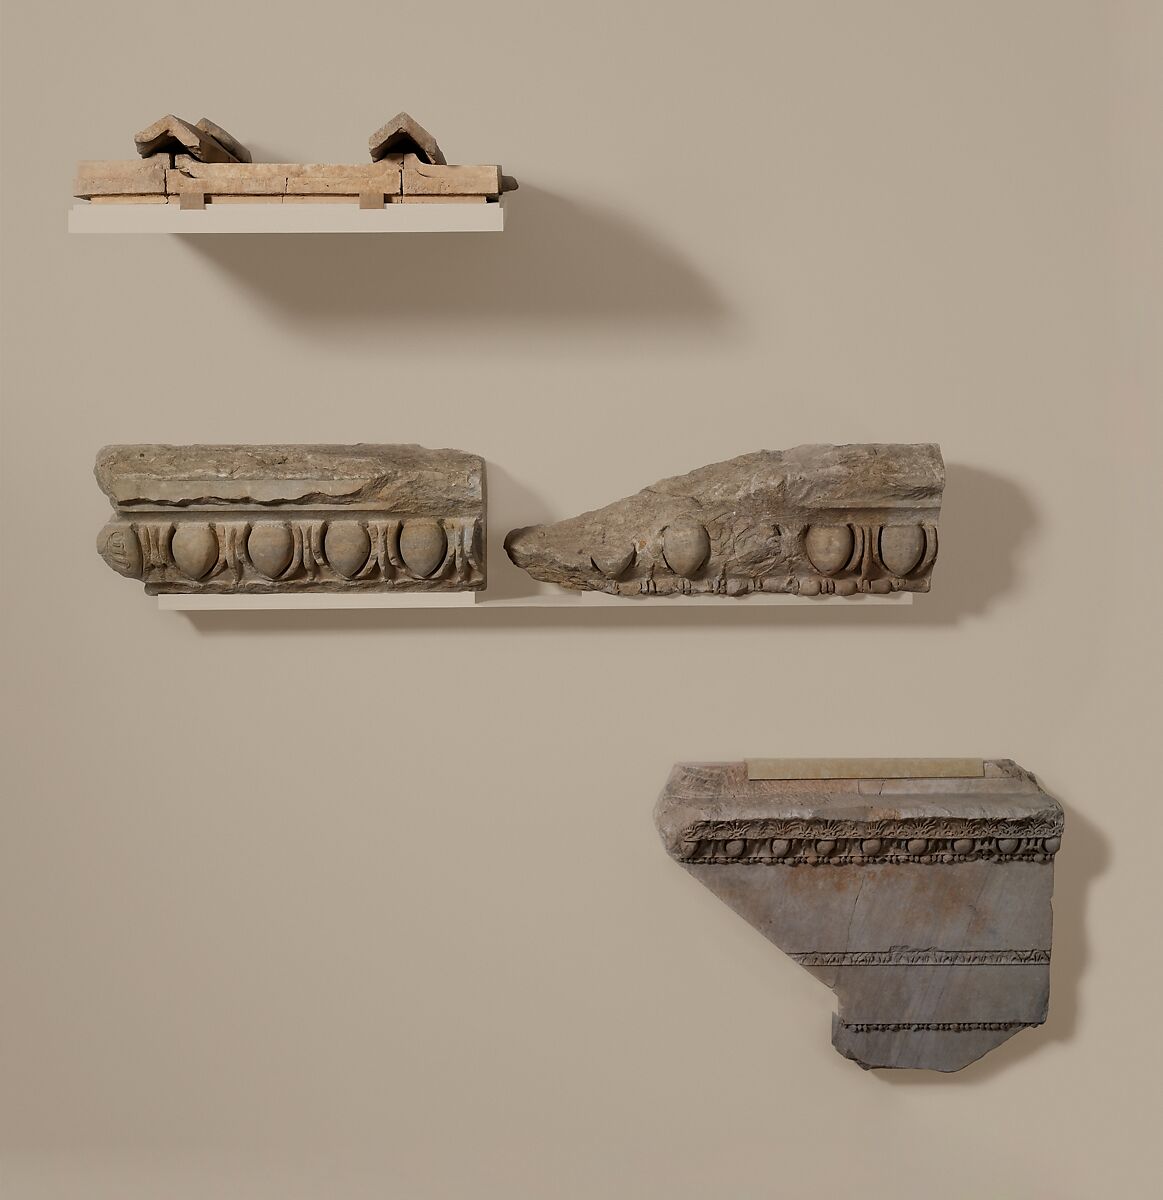 Marble fragment of an anta (pilaster) capital from the Temple of Artemis at Sardis, Marble, Greek 